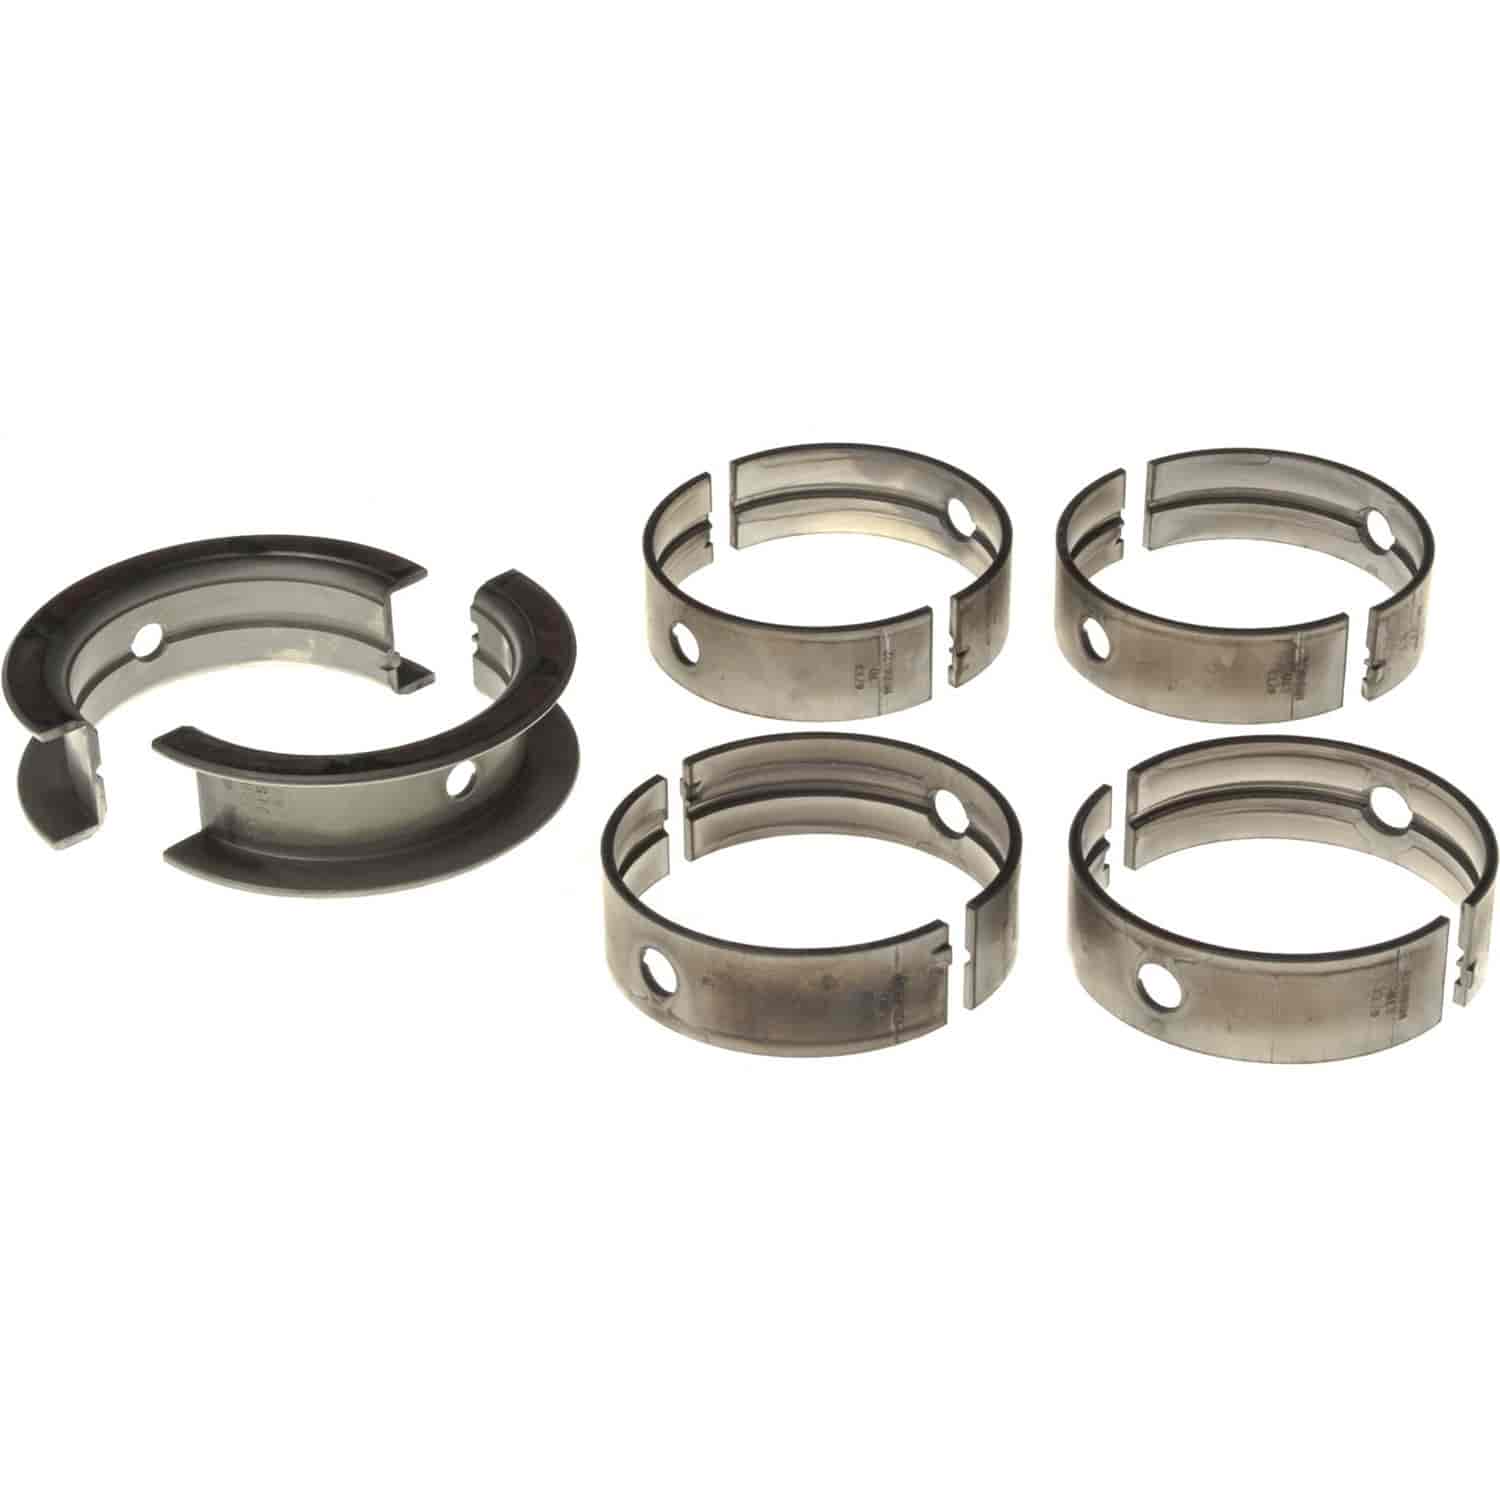 Main Bearing Set Ford 1964-1977 FE V8 352/360/390/410/427/428 (5.8/5.9/6.4/6.7/7.0L) with -.010" Undersize